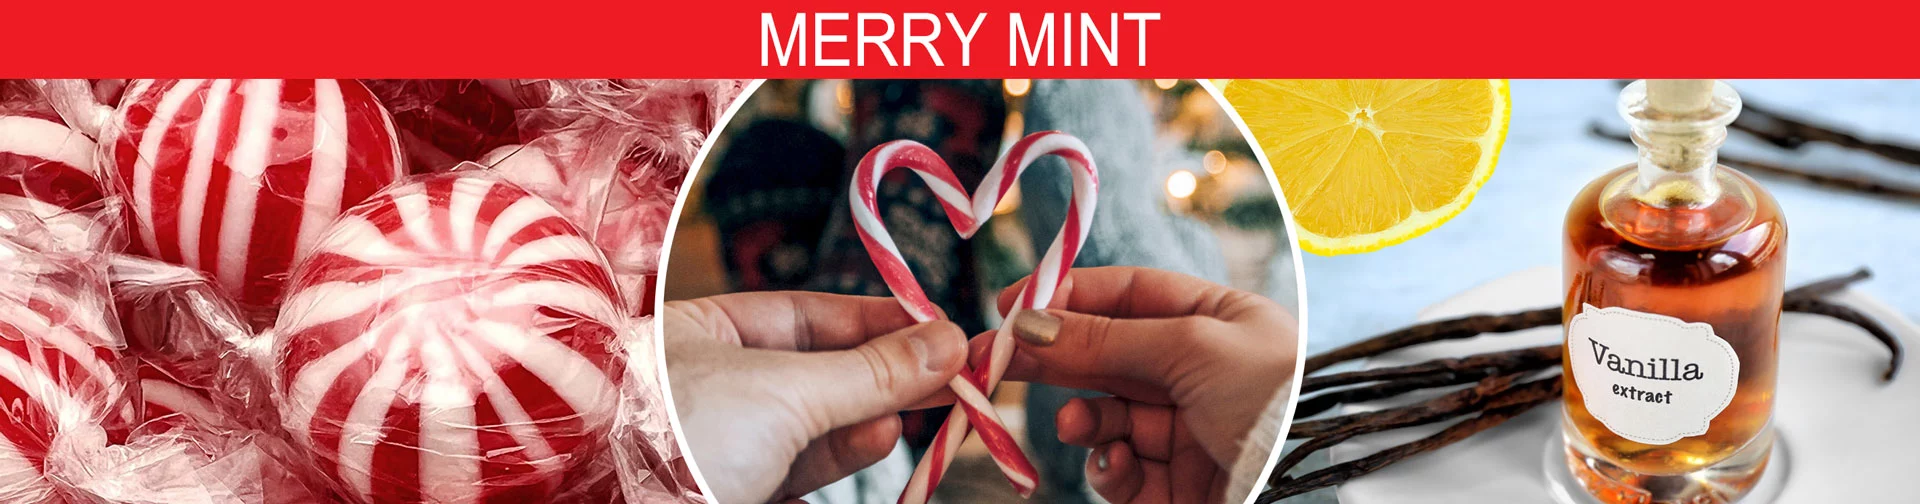 Banner image of sweet, invigorating fragrance of peppermint will bring back memories of candy cane adorned Christmas Trees.